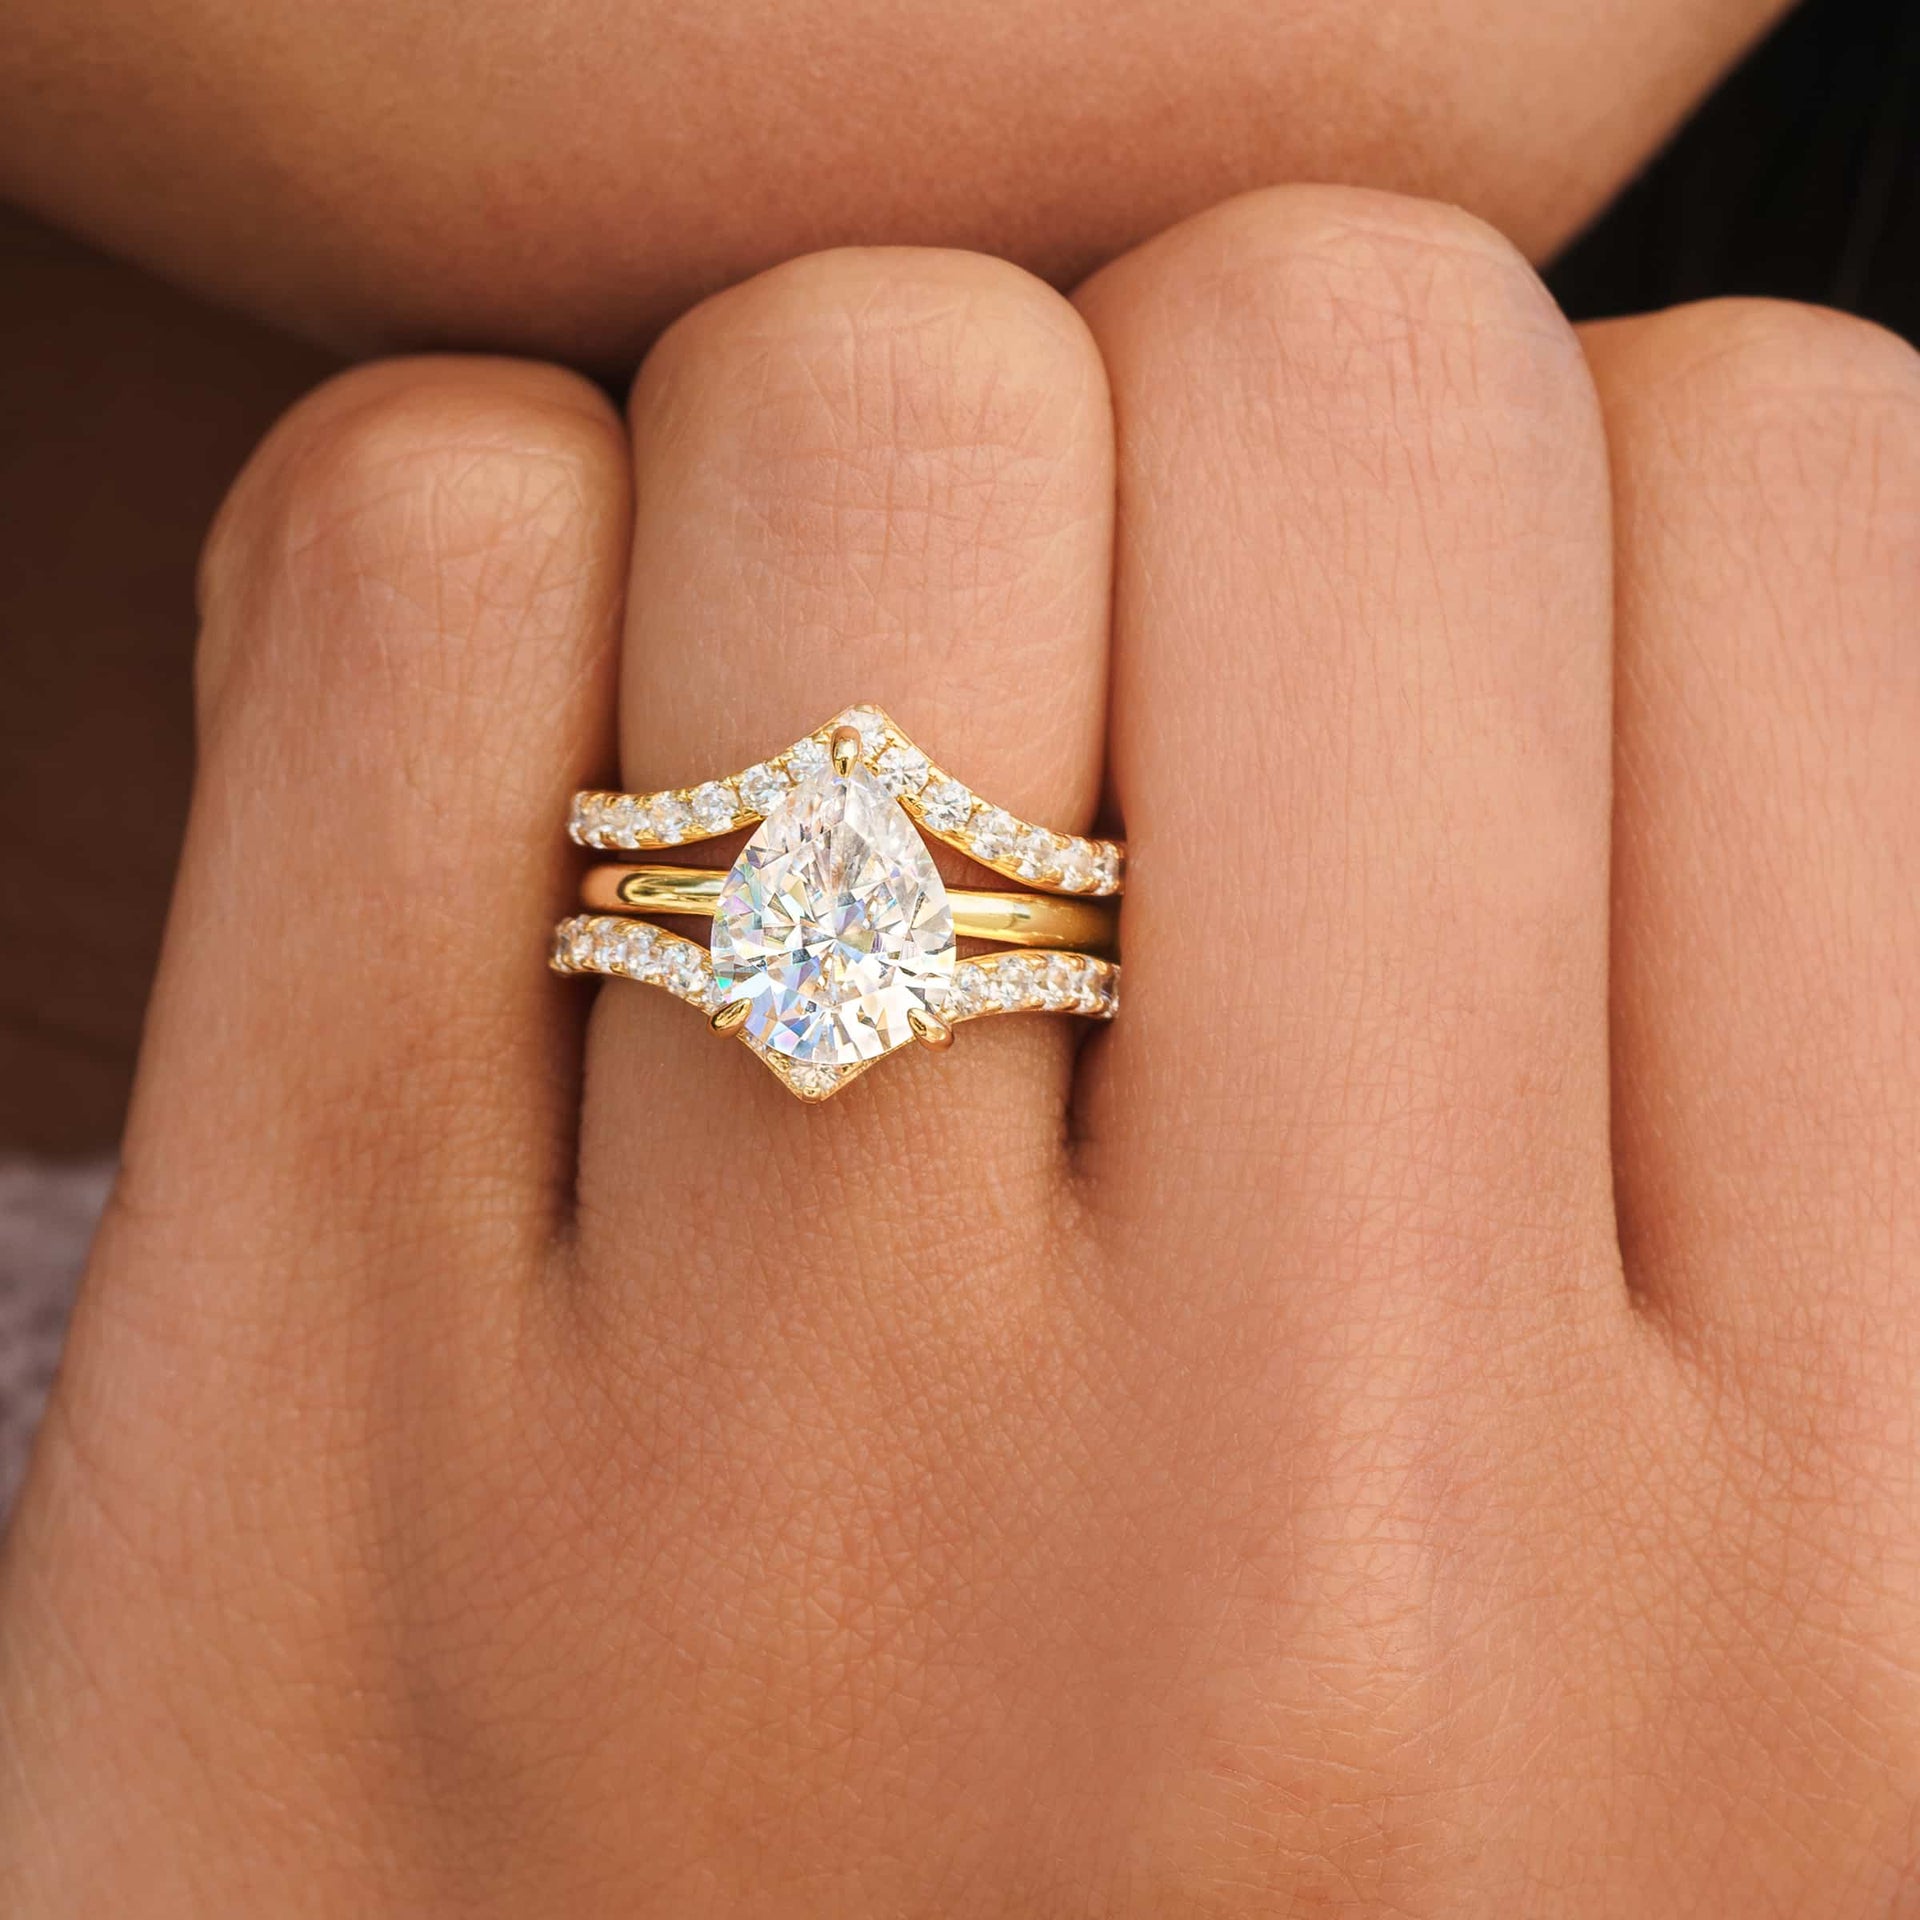 Unique gold half eternity wedding bands stacked with a stunning gold pear cut engagement ring